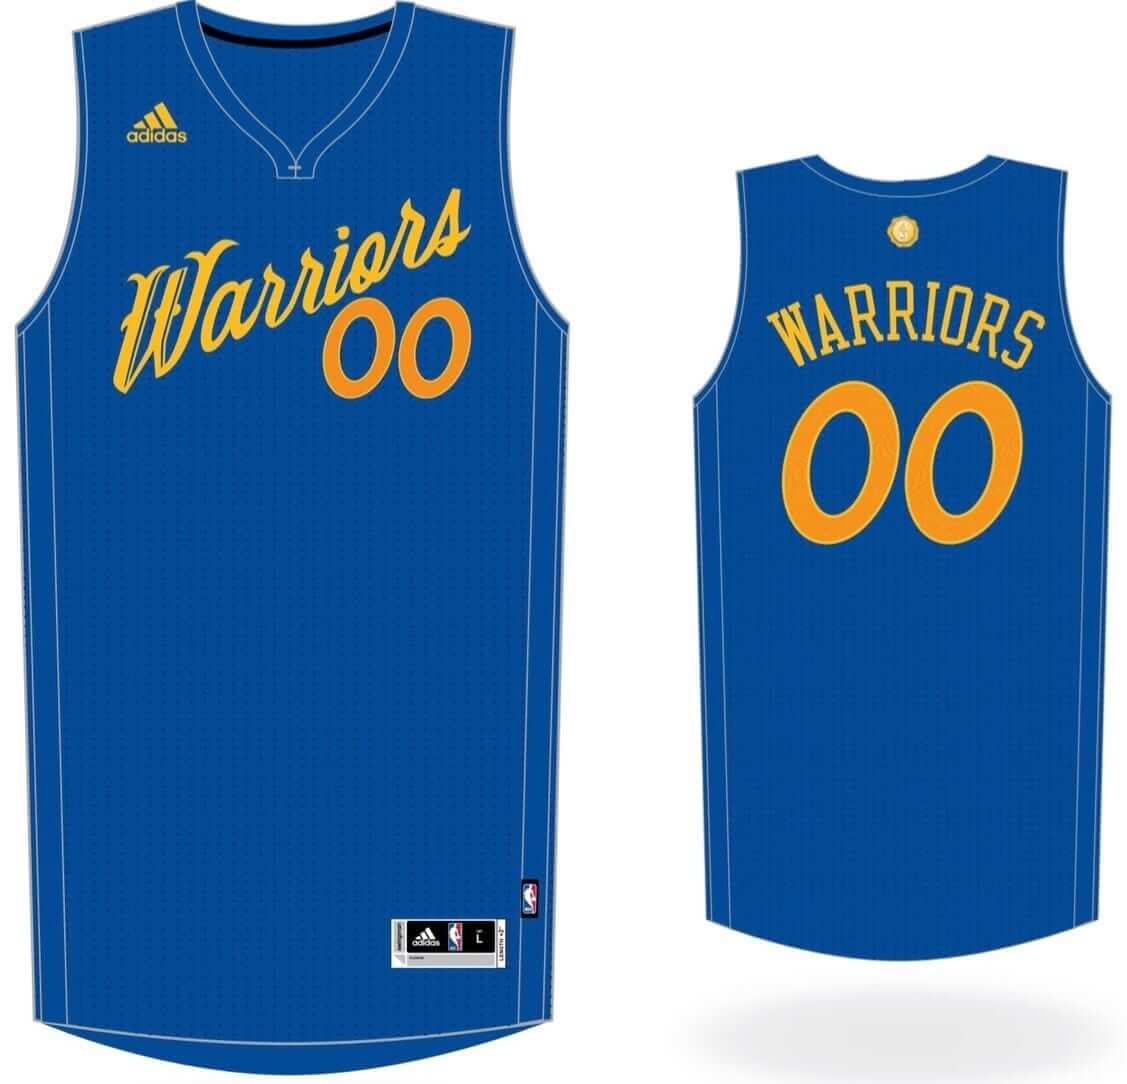 The NBA Christmas Day jerseys leaked and they are gorgeous